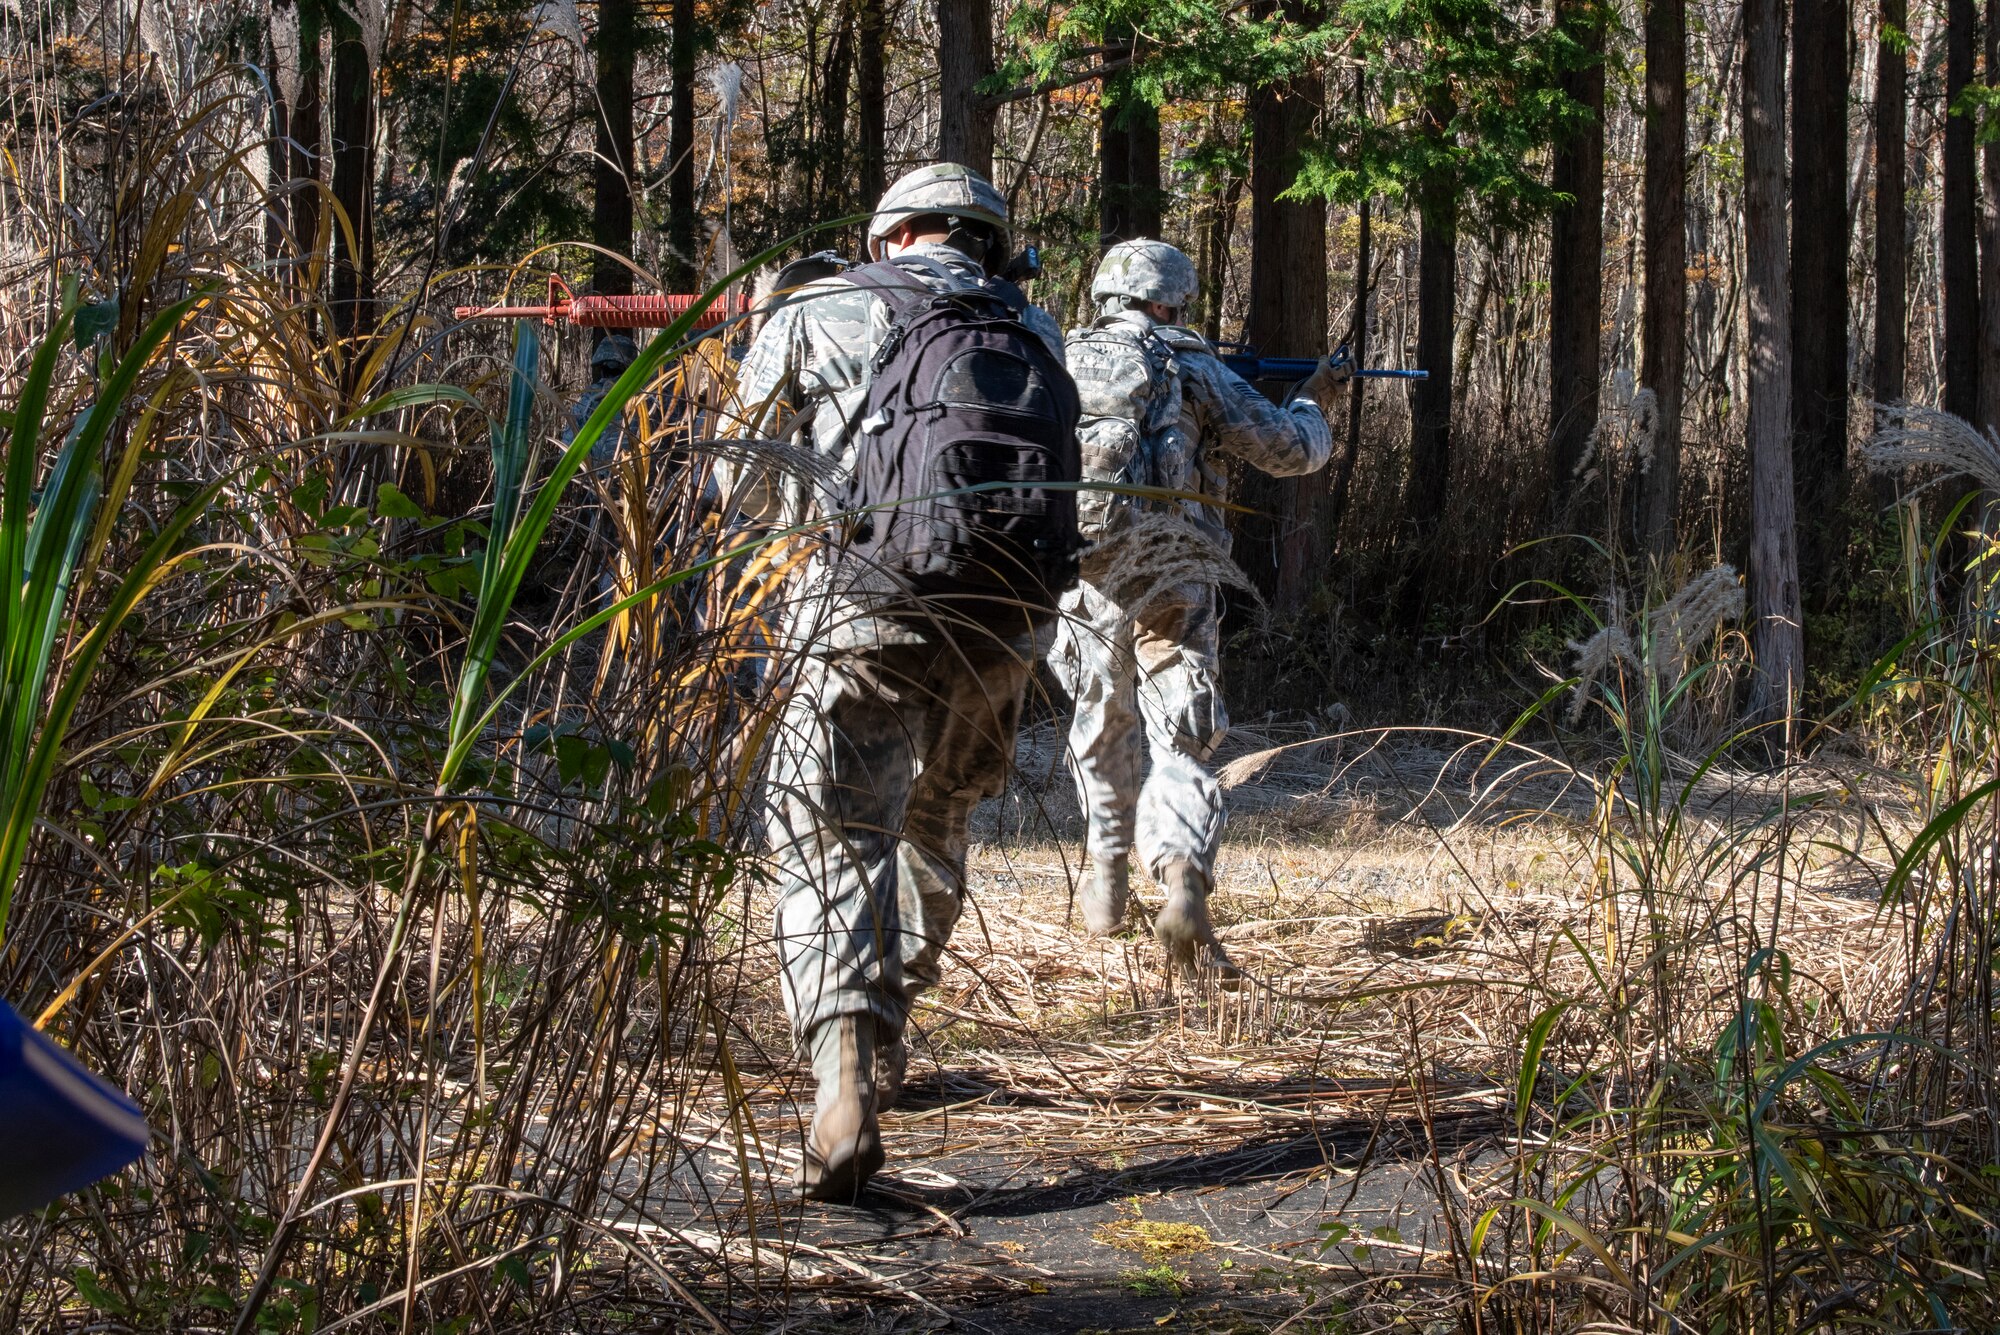 A pair of Airmen from the 374th Security Forces Squadron each cover a side as they pass through an open crossing during a field training exercise at Camp Fuji, Japan, Nov. 8, 2018.